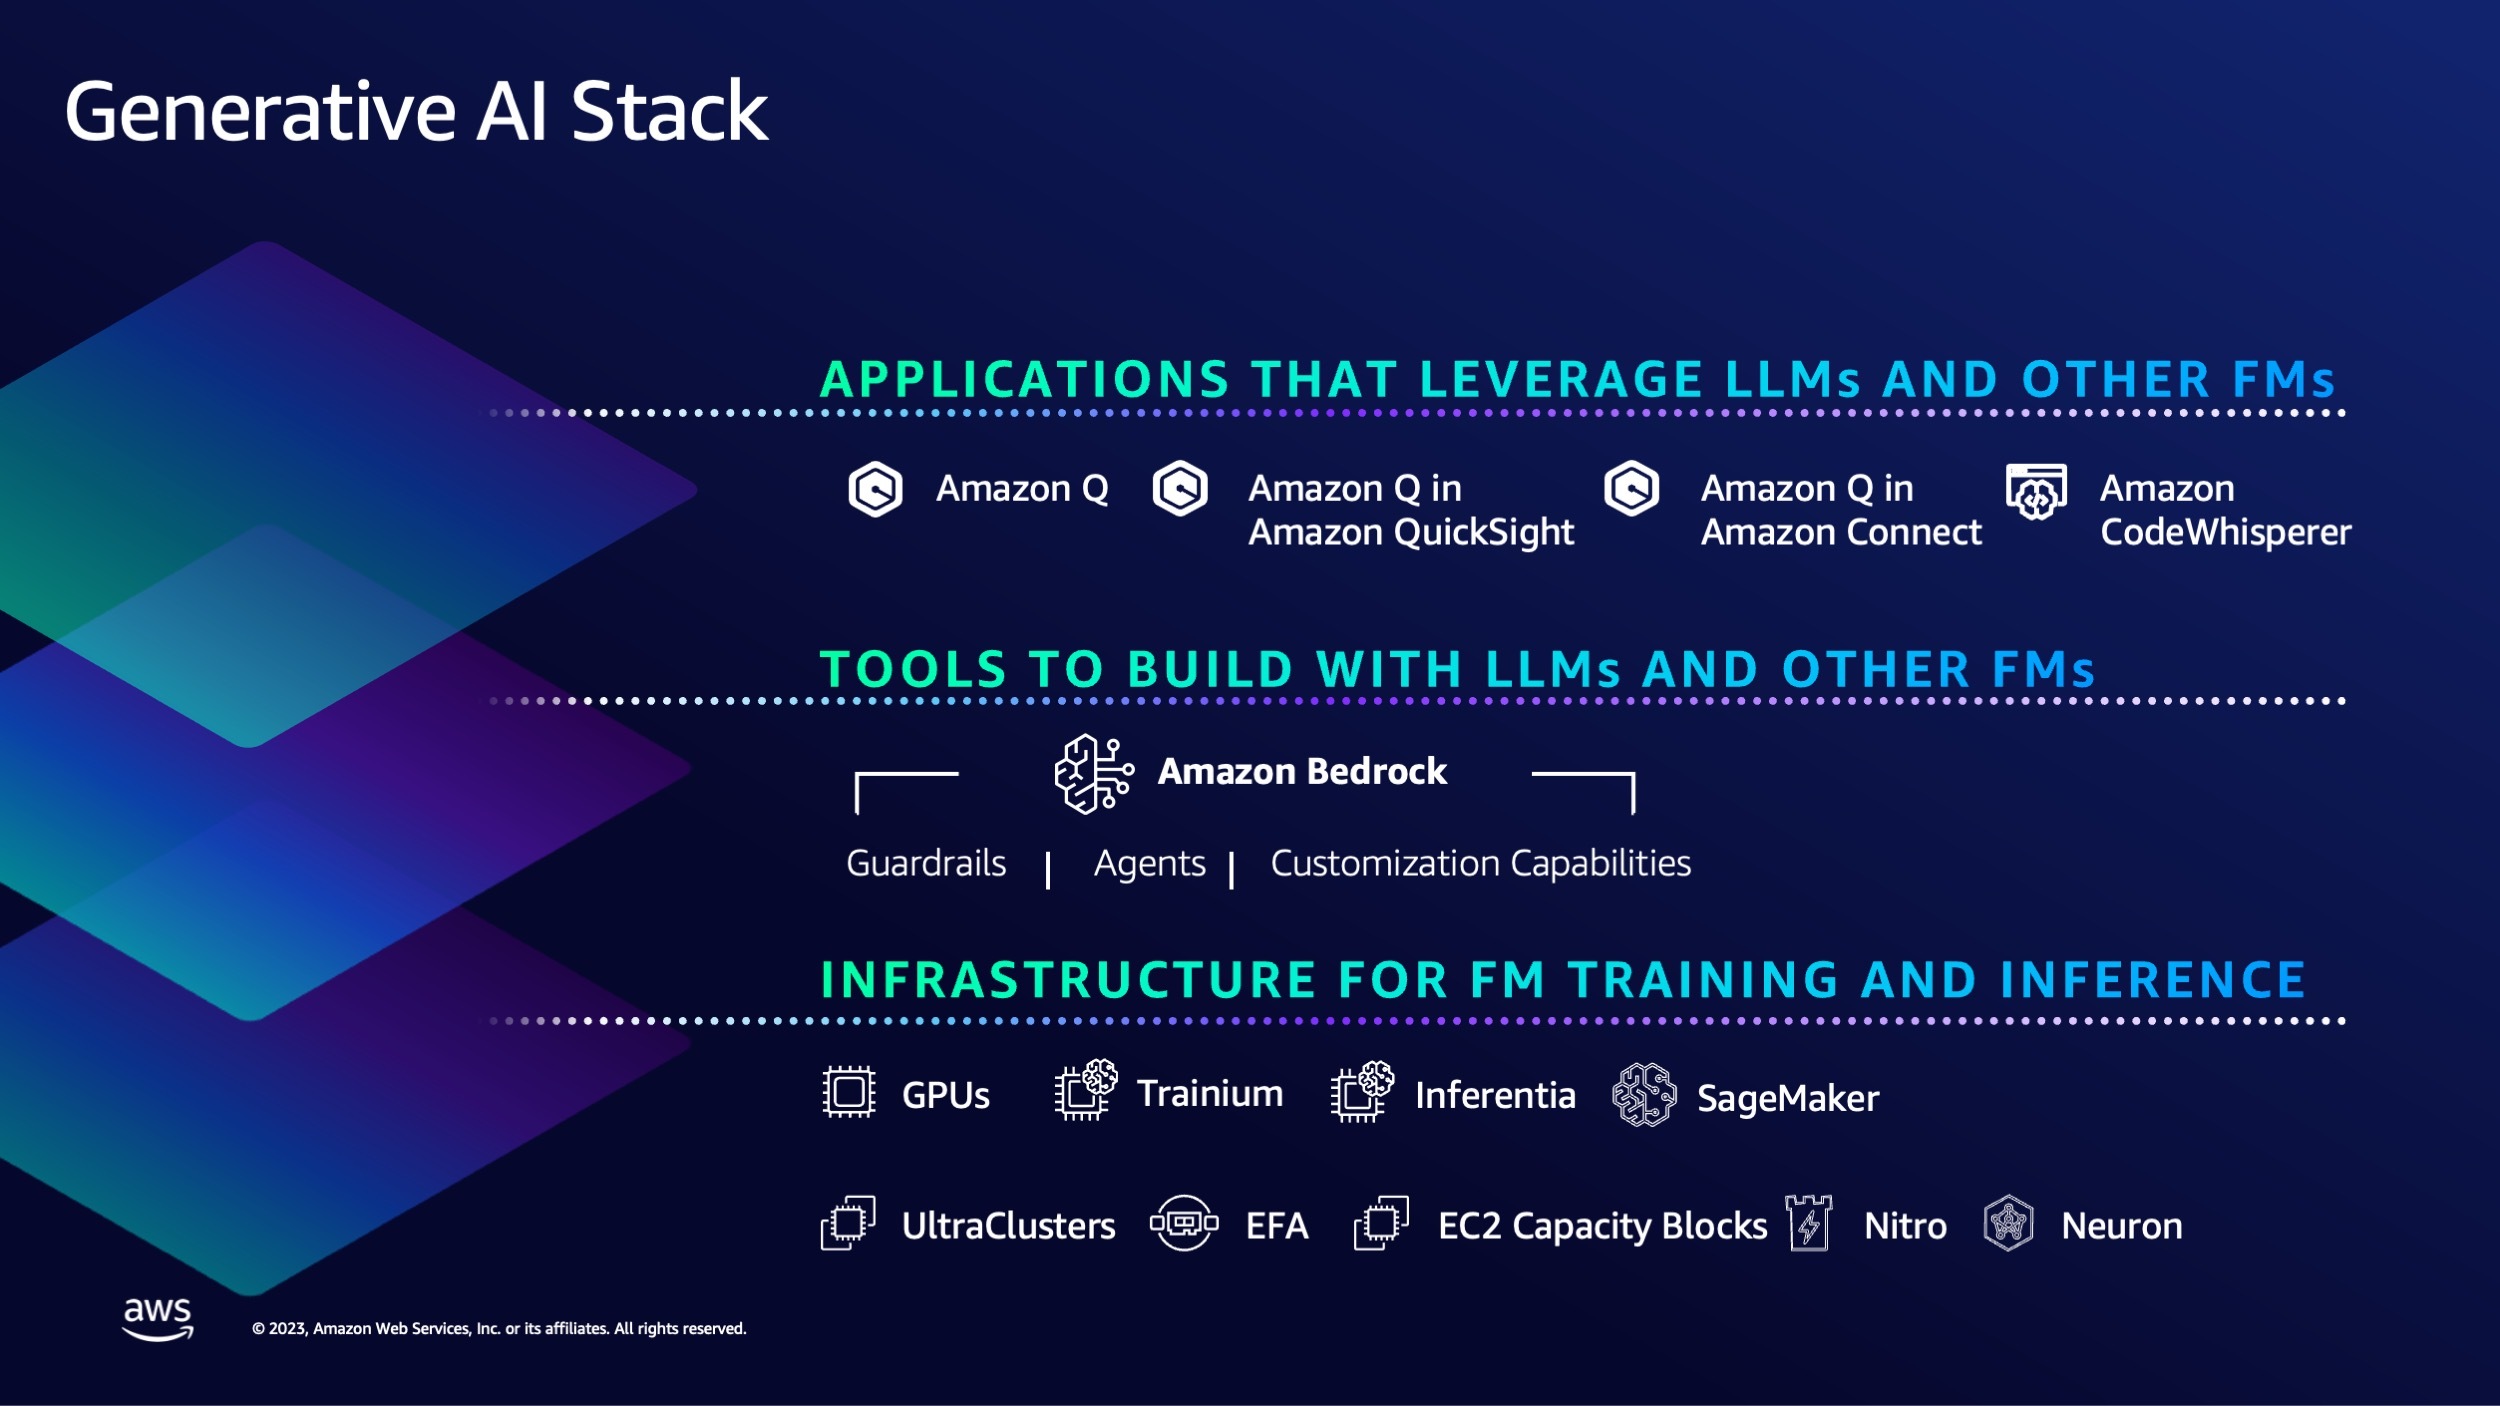 The Gen AI Stack